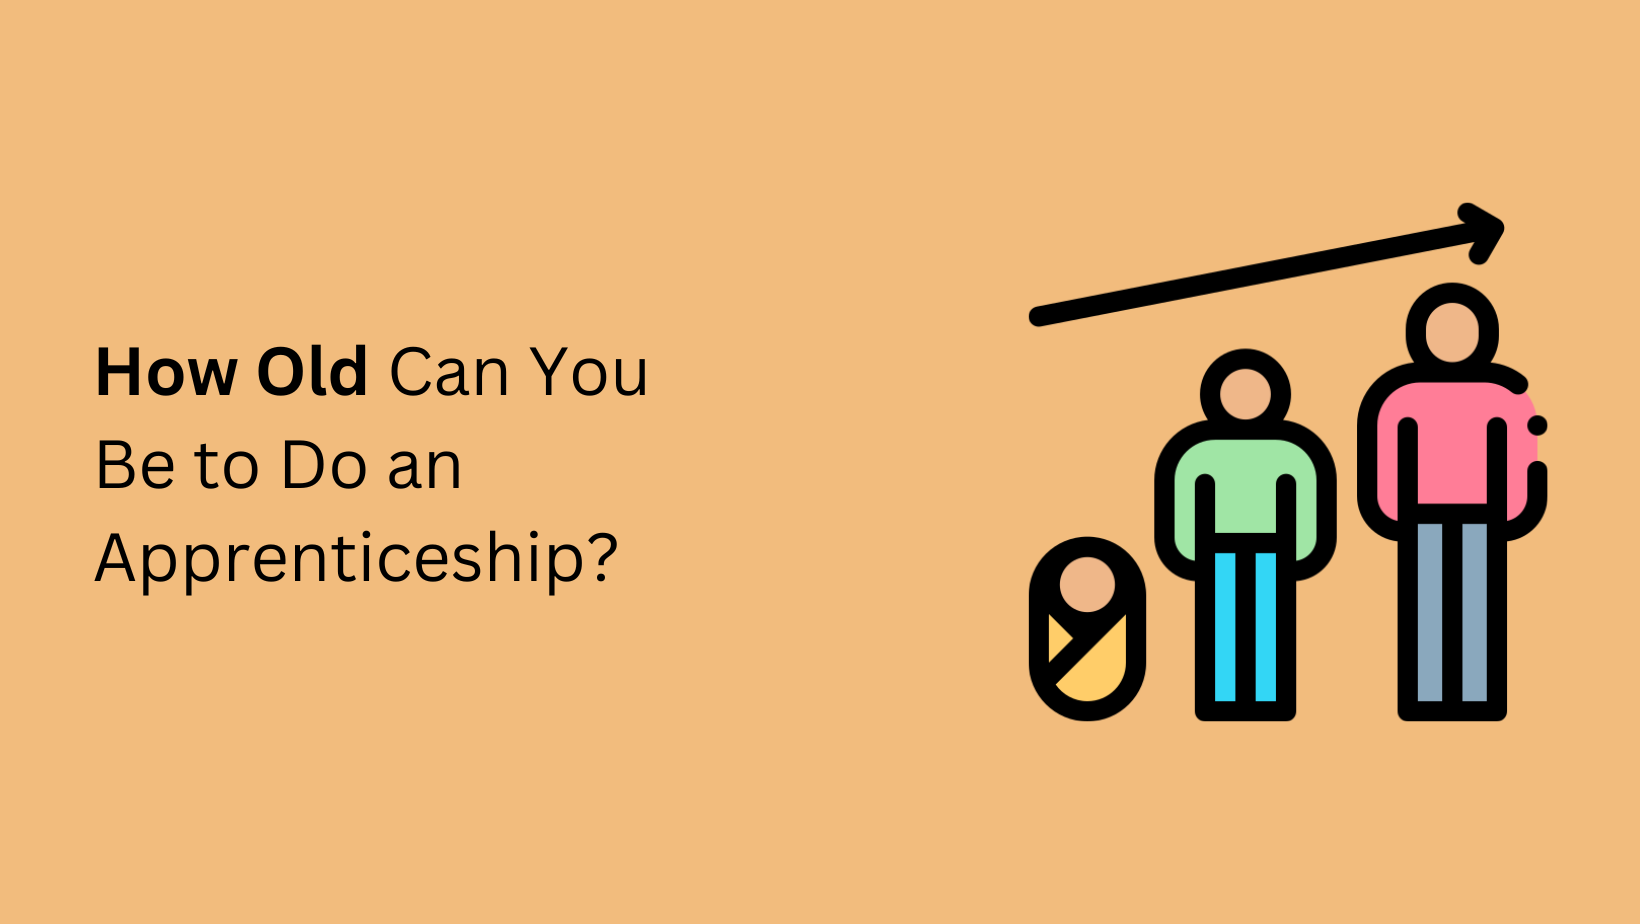 How Old Can You Be to Do an Apprenticeship